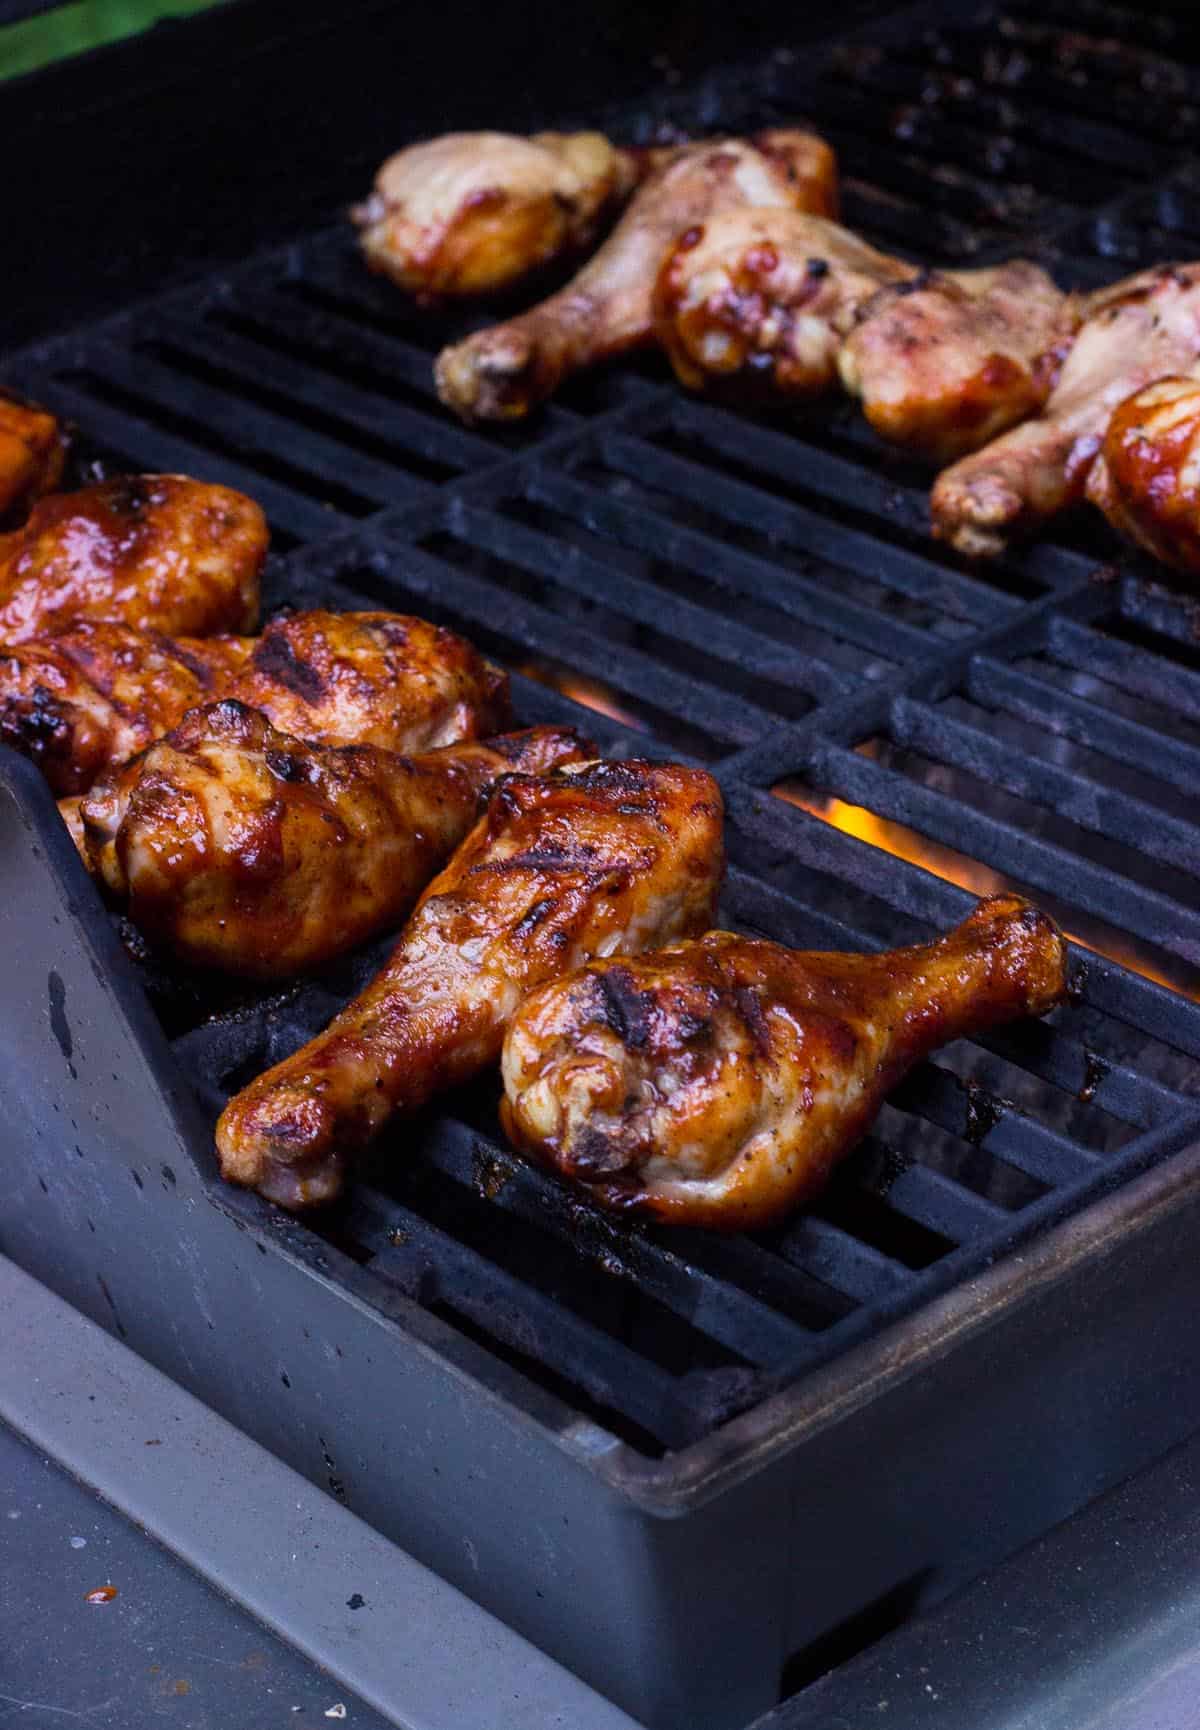 The drumsticks on the grill halfway basted with BBQ sauce.